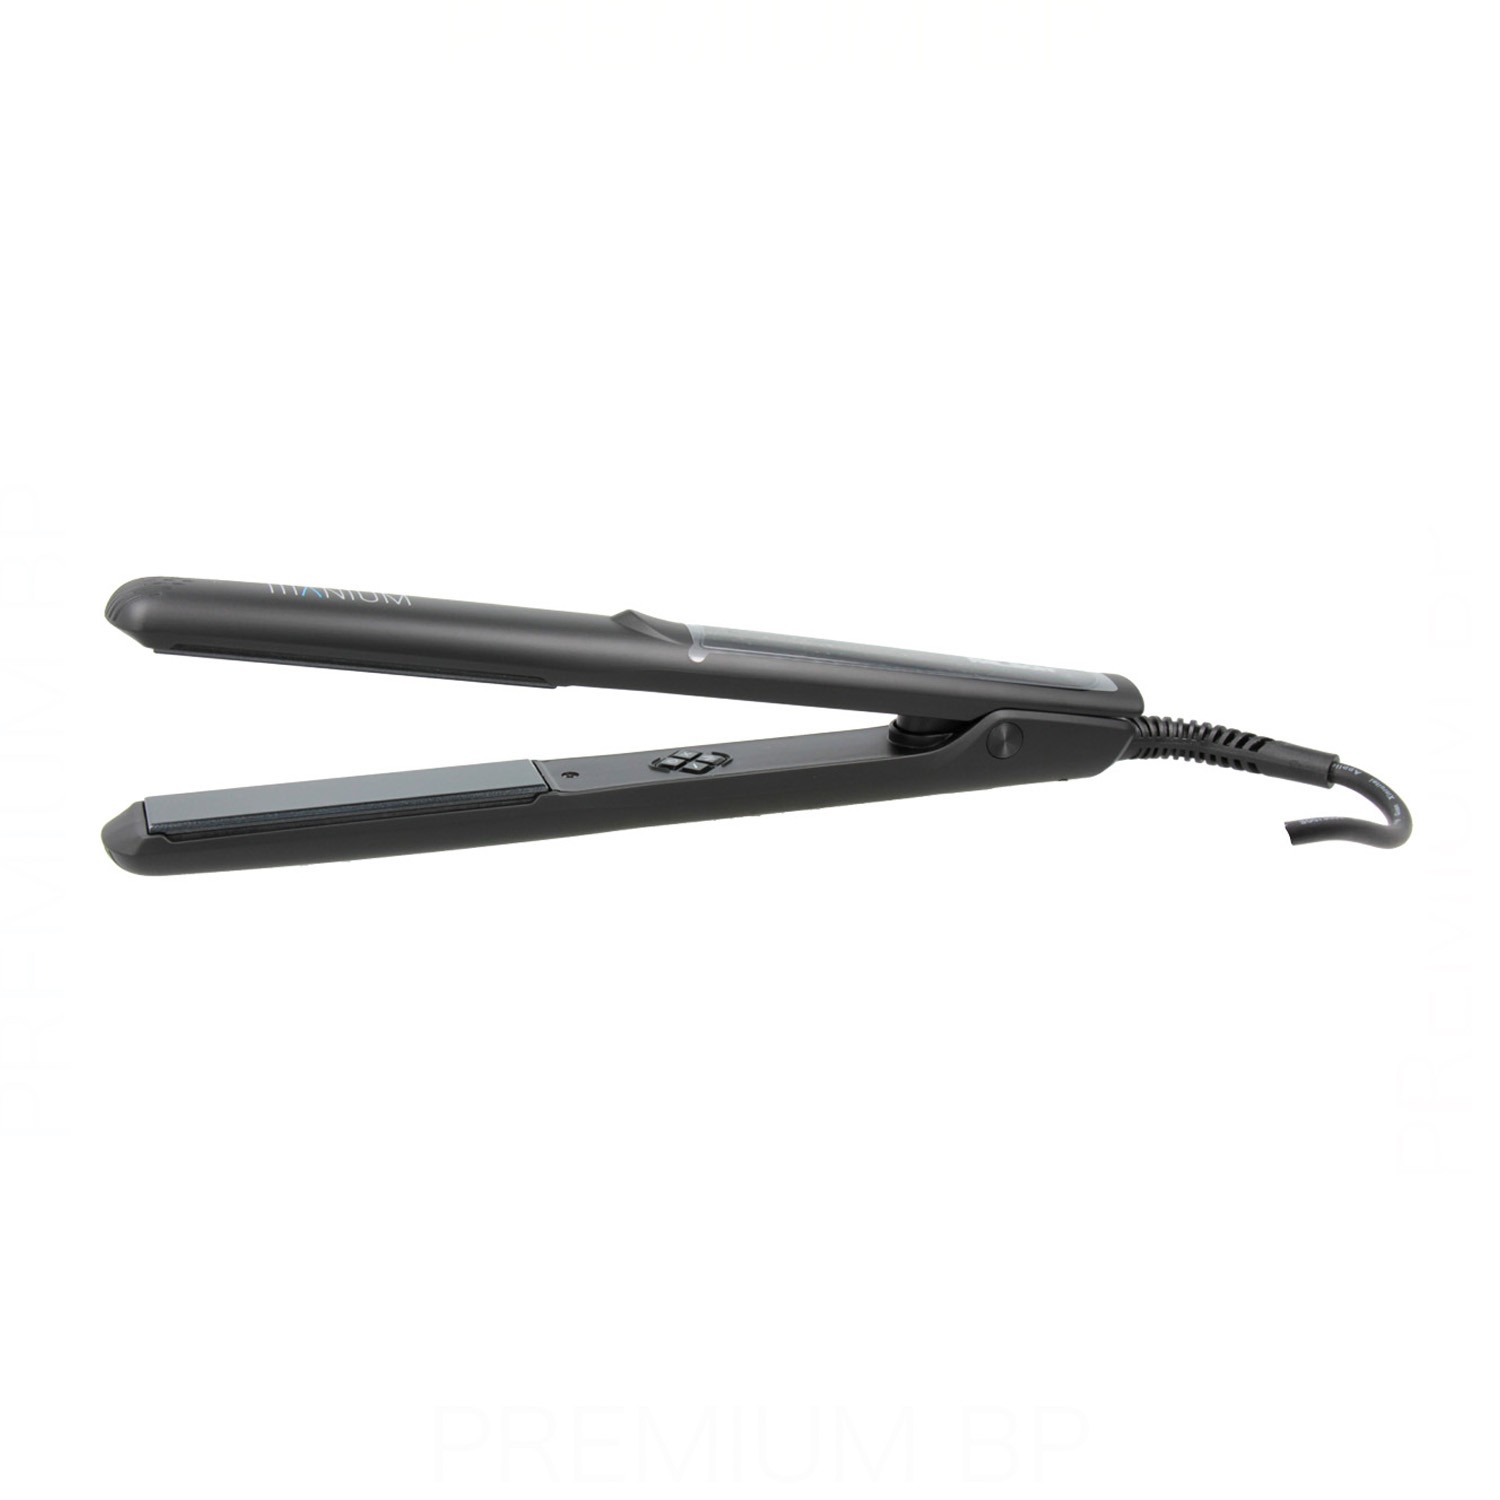 Palson Titanium Professional Hair Straightener at the best price. A...